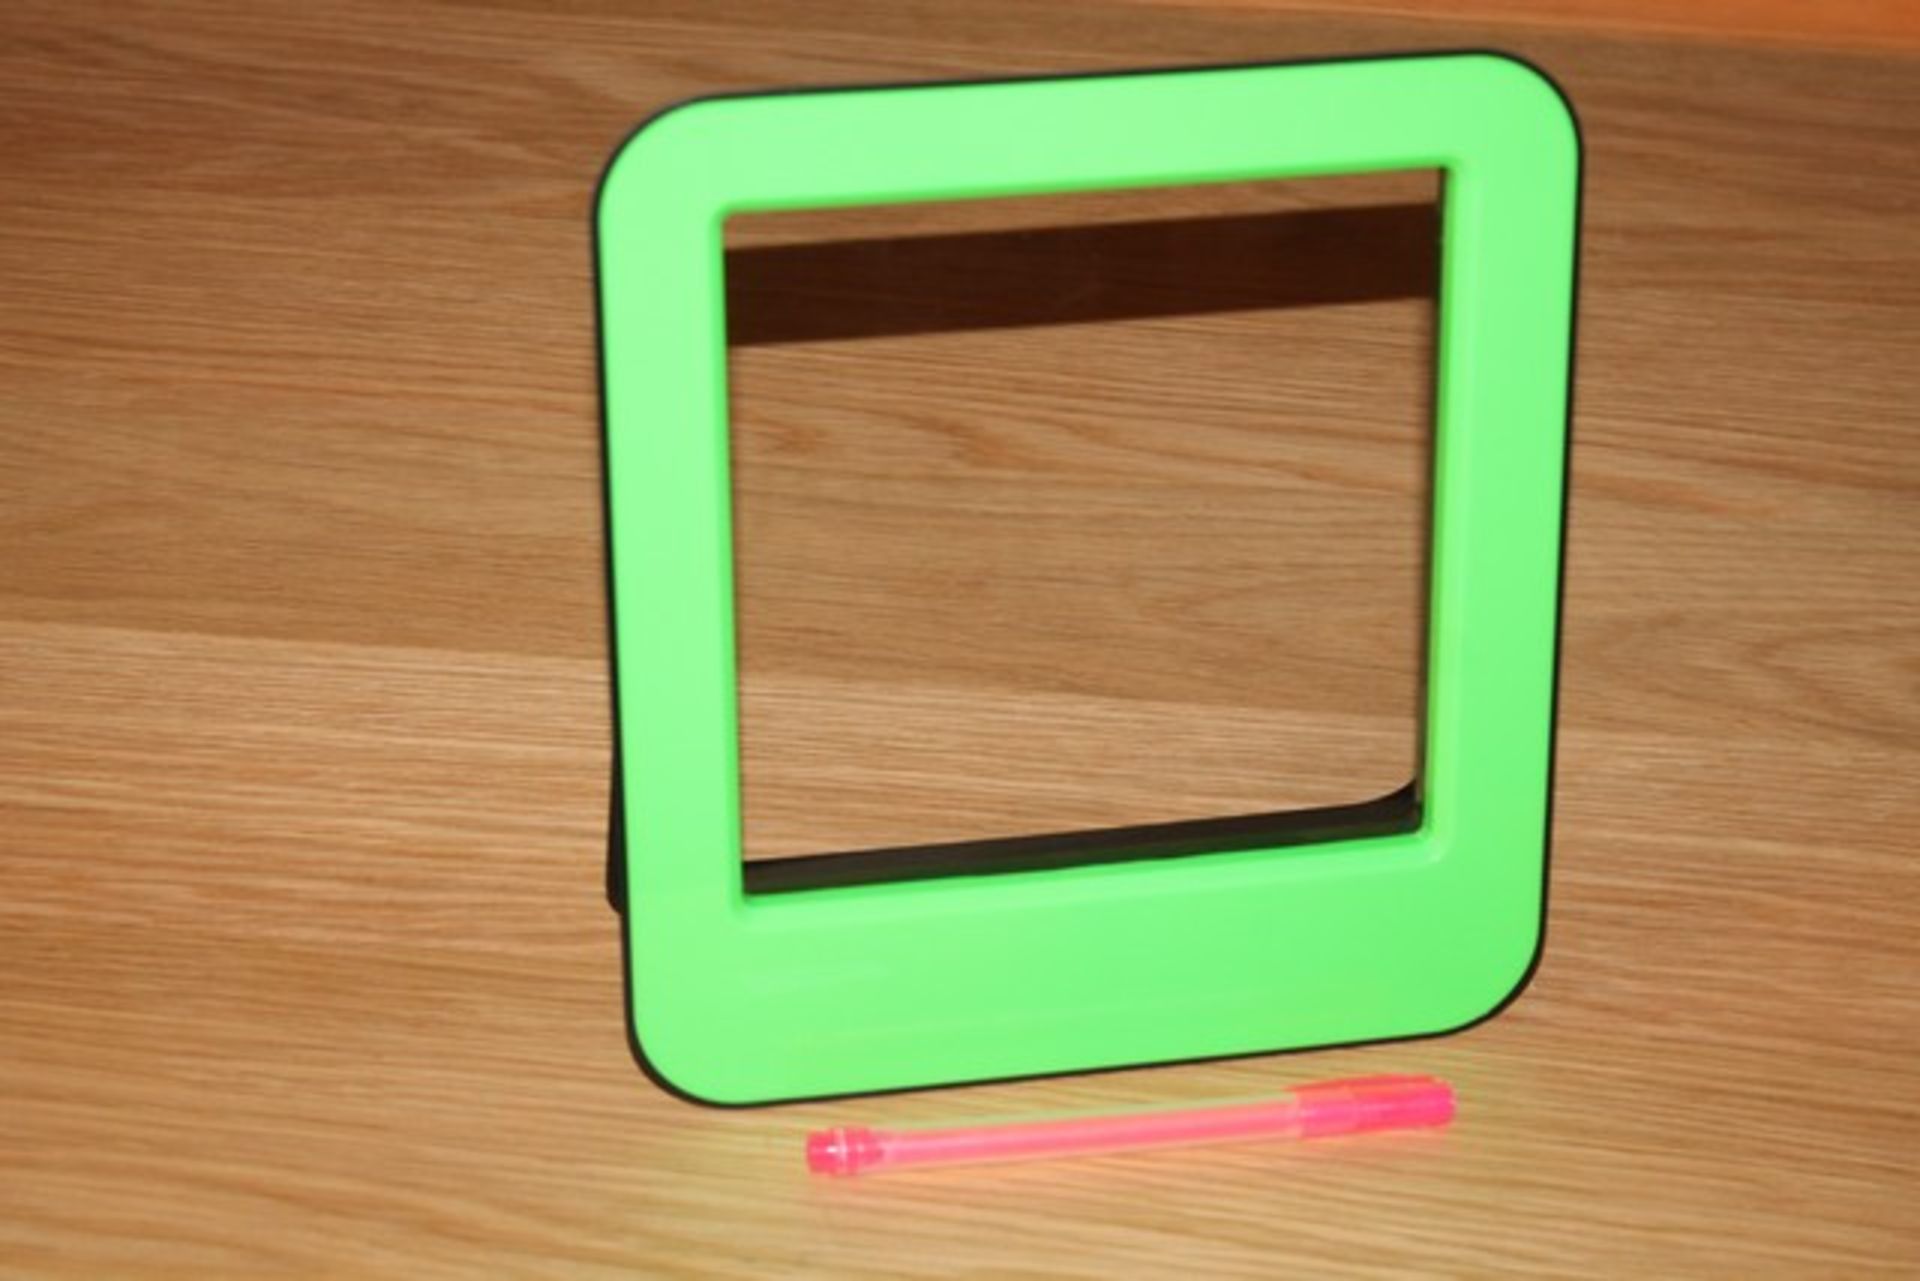 14 x BOXED BRAND NEW NEON WHITEBOARDS AND PEN SETS (26.1.15)  *PLEASE NOTE THAT THE BID PRICE IS